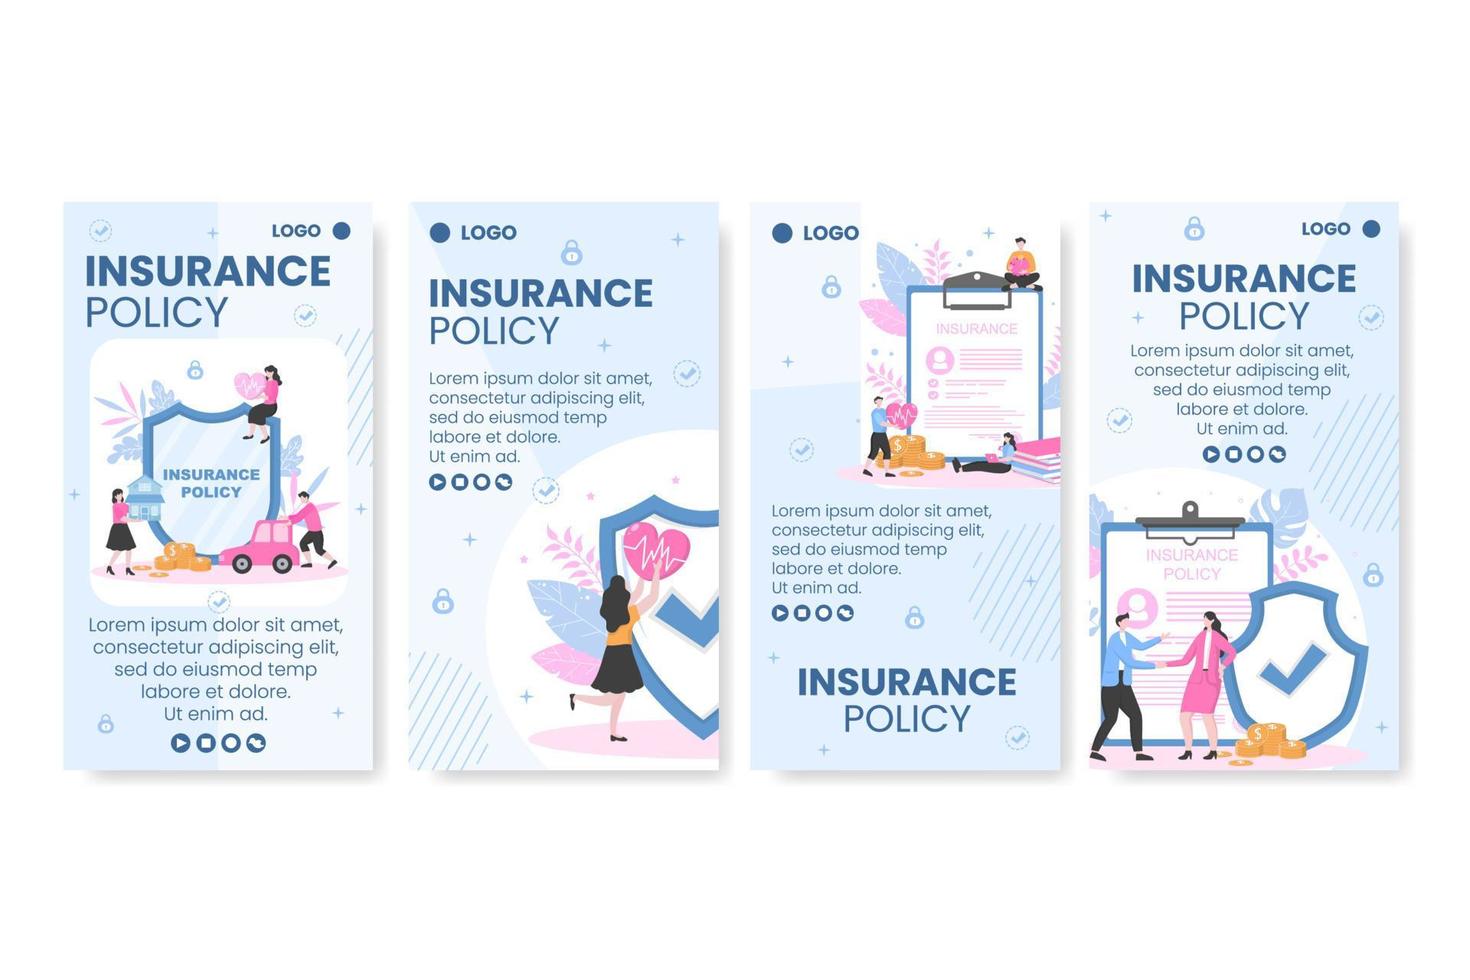 Insurance Policy Stories Template Flat Design Illustration Editable of Square Background to Social media, Greeting Card or Web vector